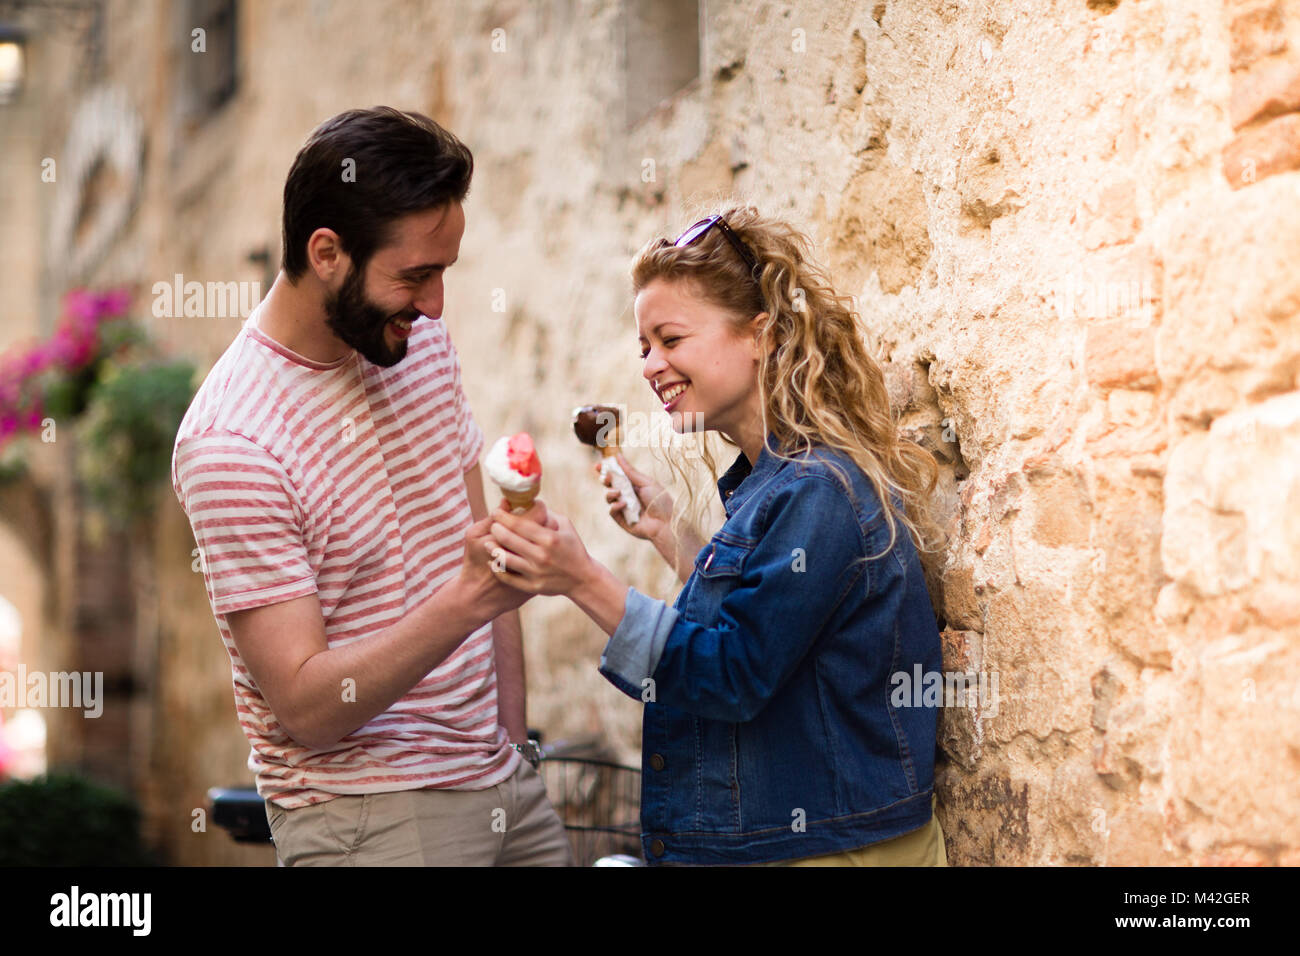 Young female eating gelato with boyfriend Stock Photo